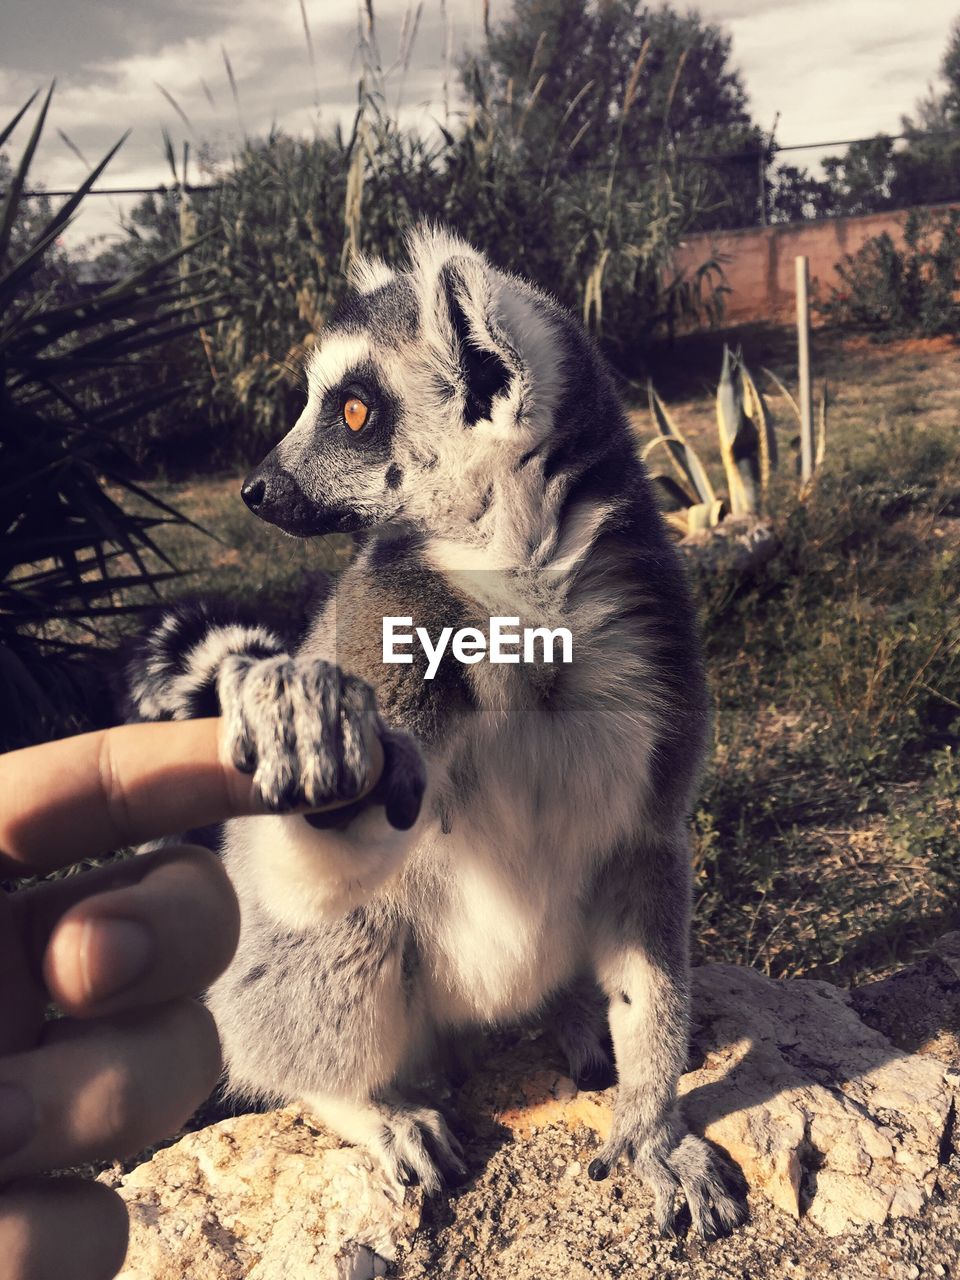 Ring-tailed lemur holding human finger while looking away at zoo